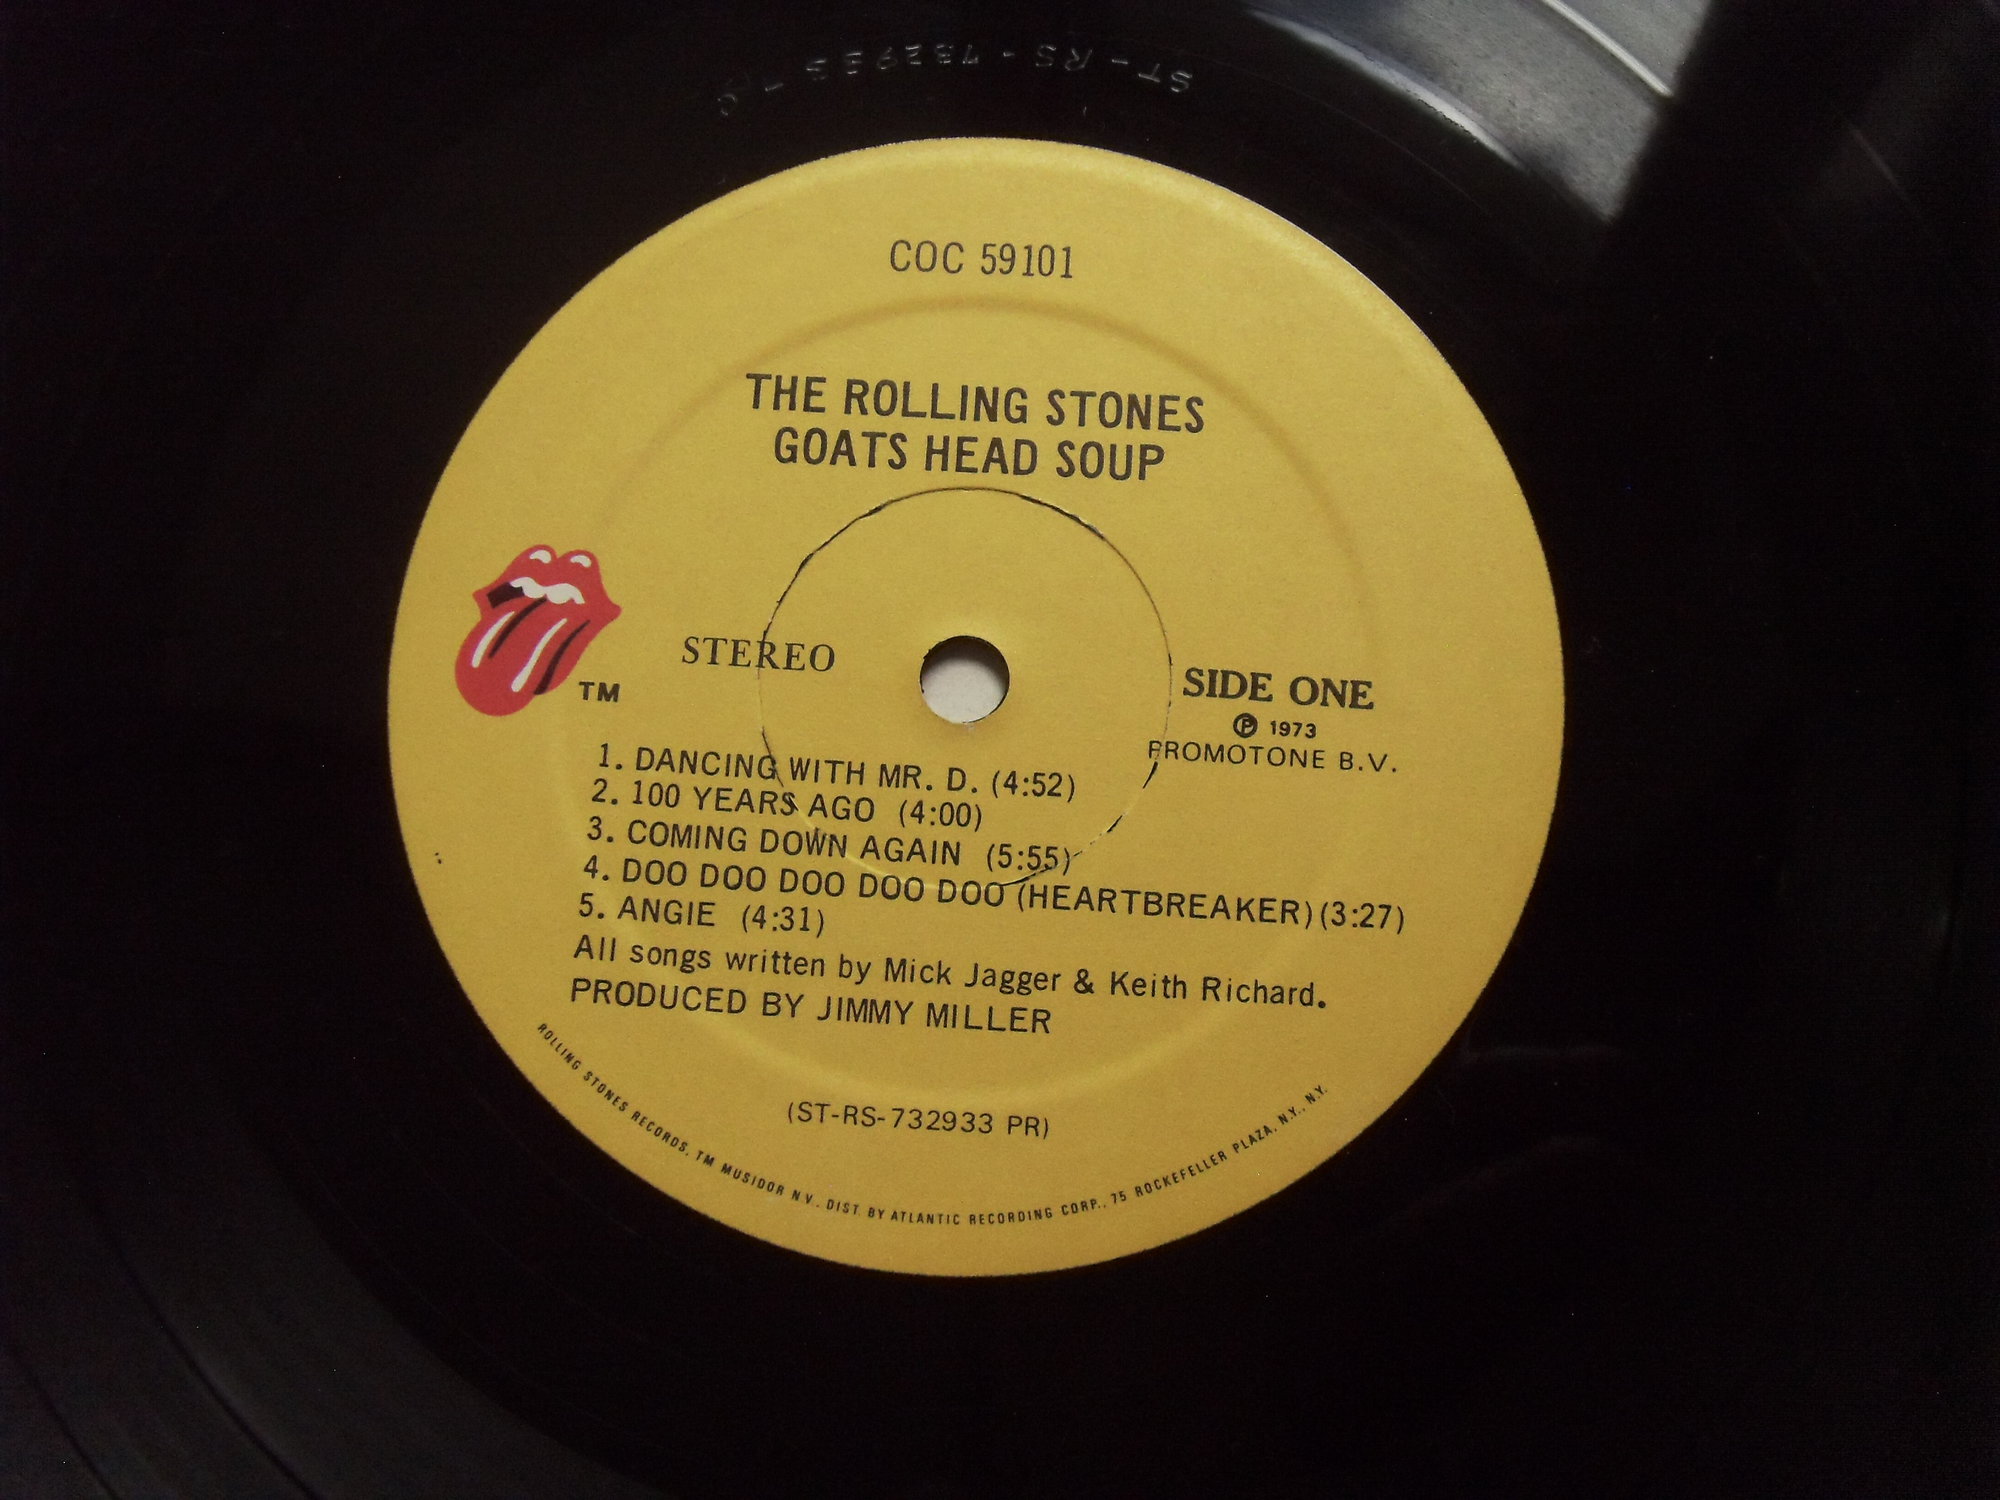 THE ROLLING STONES Goats Head Soup 4